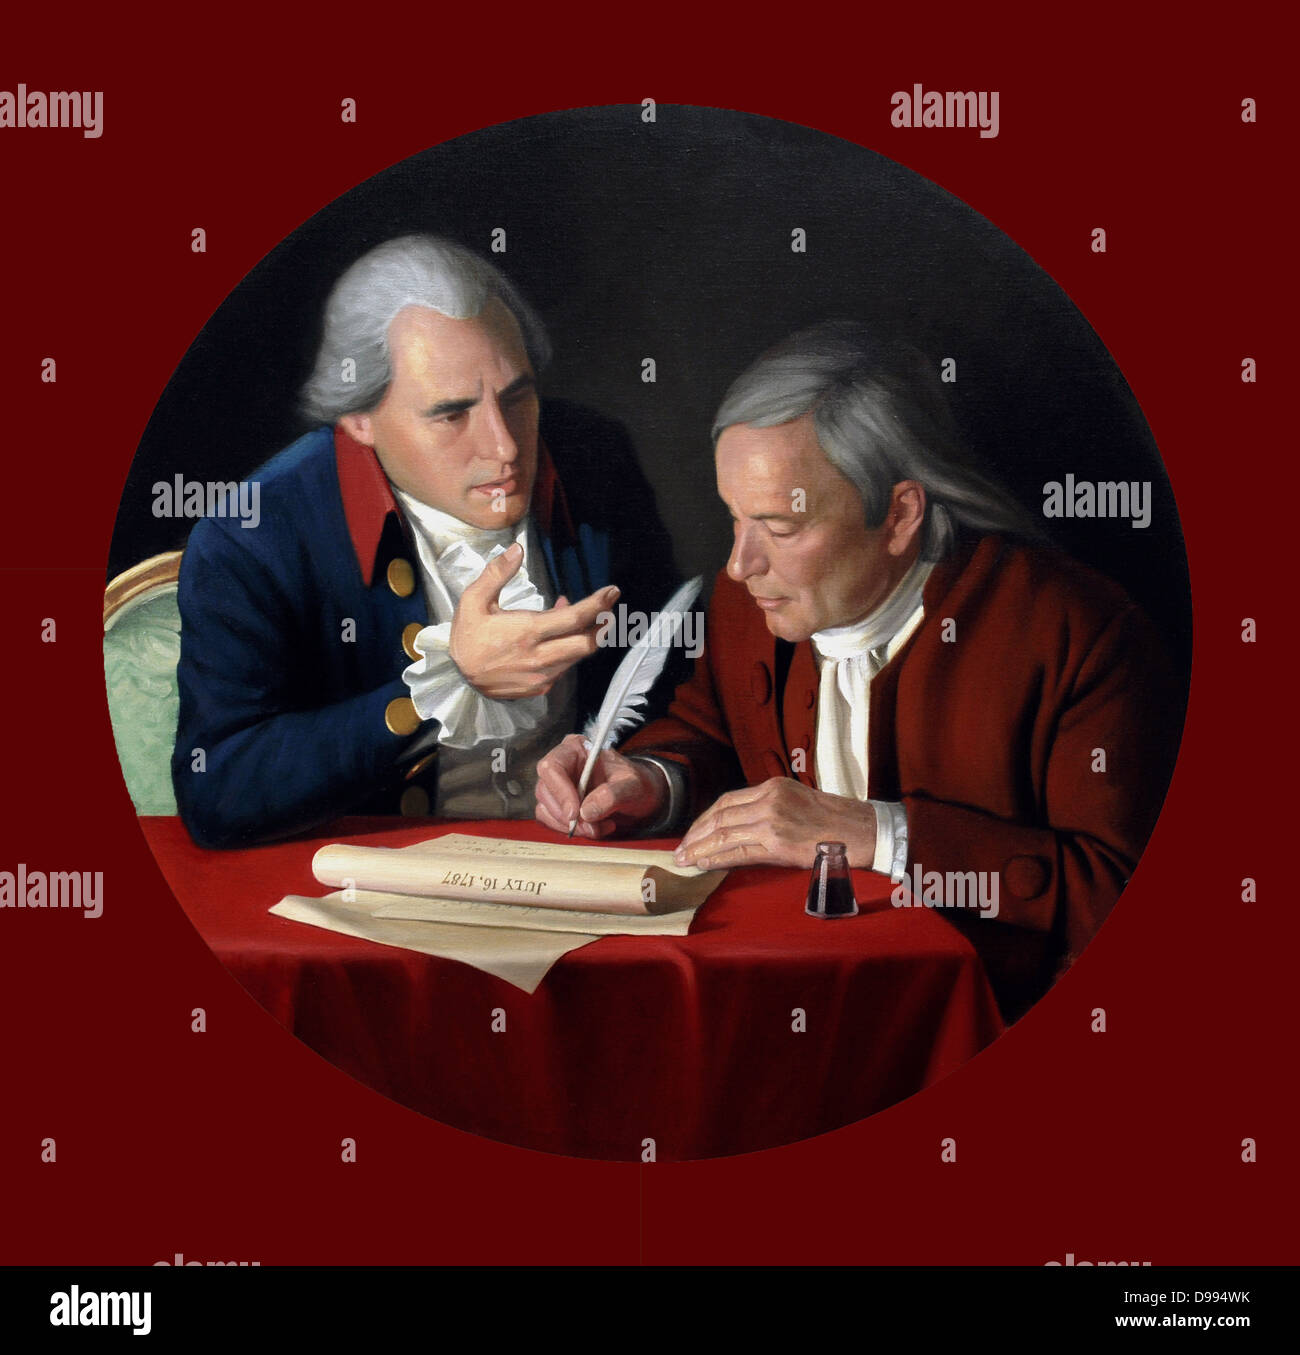 The Connecticut Compromise' 2006. Bradley Stevens American painter. Roger Sherman and Oliver Ellsworth in 1787 drafting The Great (or Connecticut) Compromise, a plan for representation in Congress. America USA Constitution Stock Photo